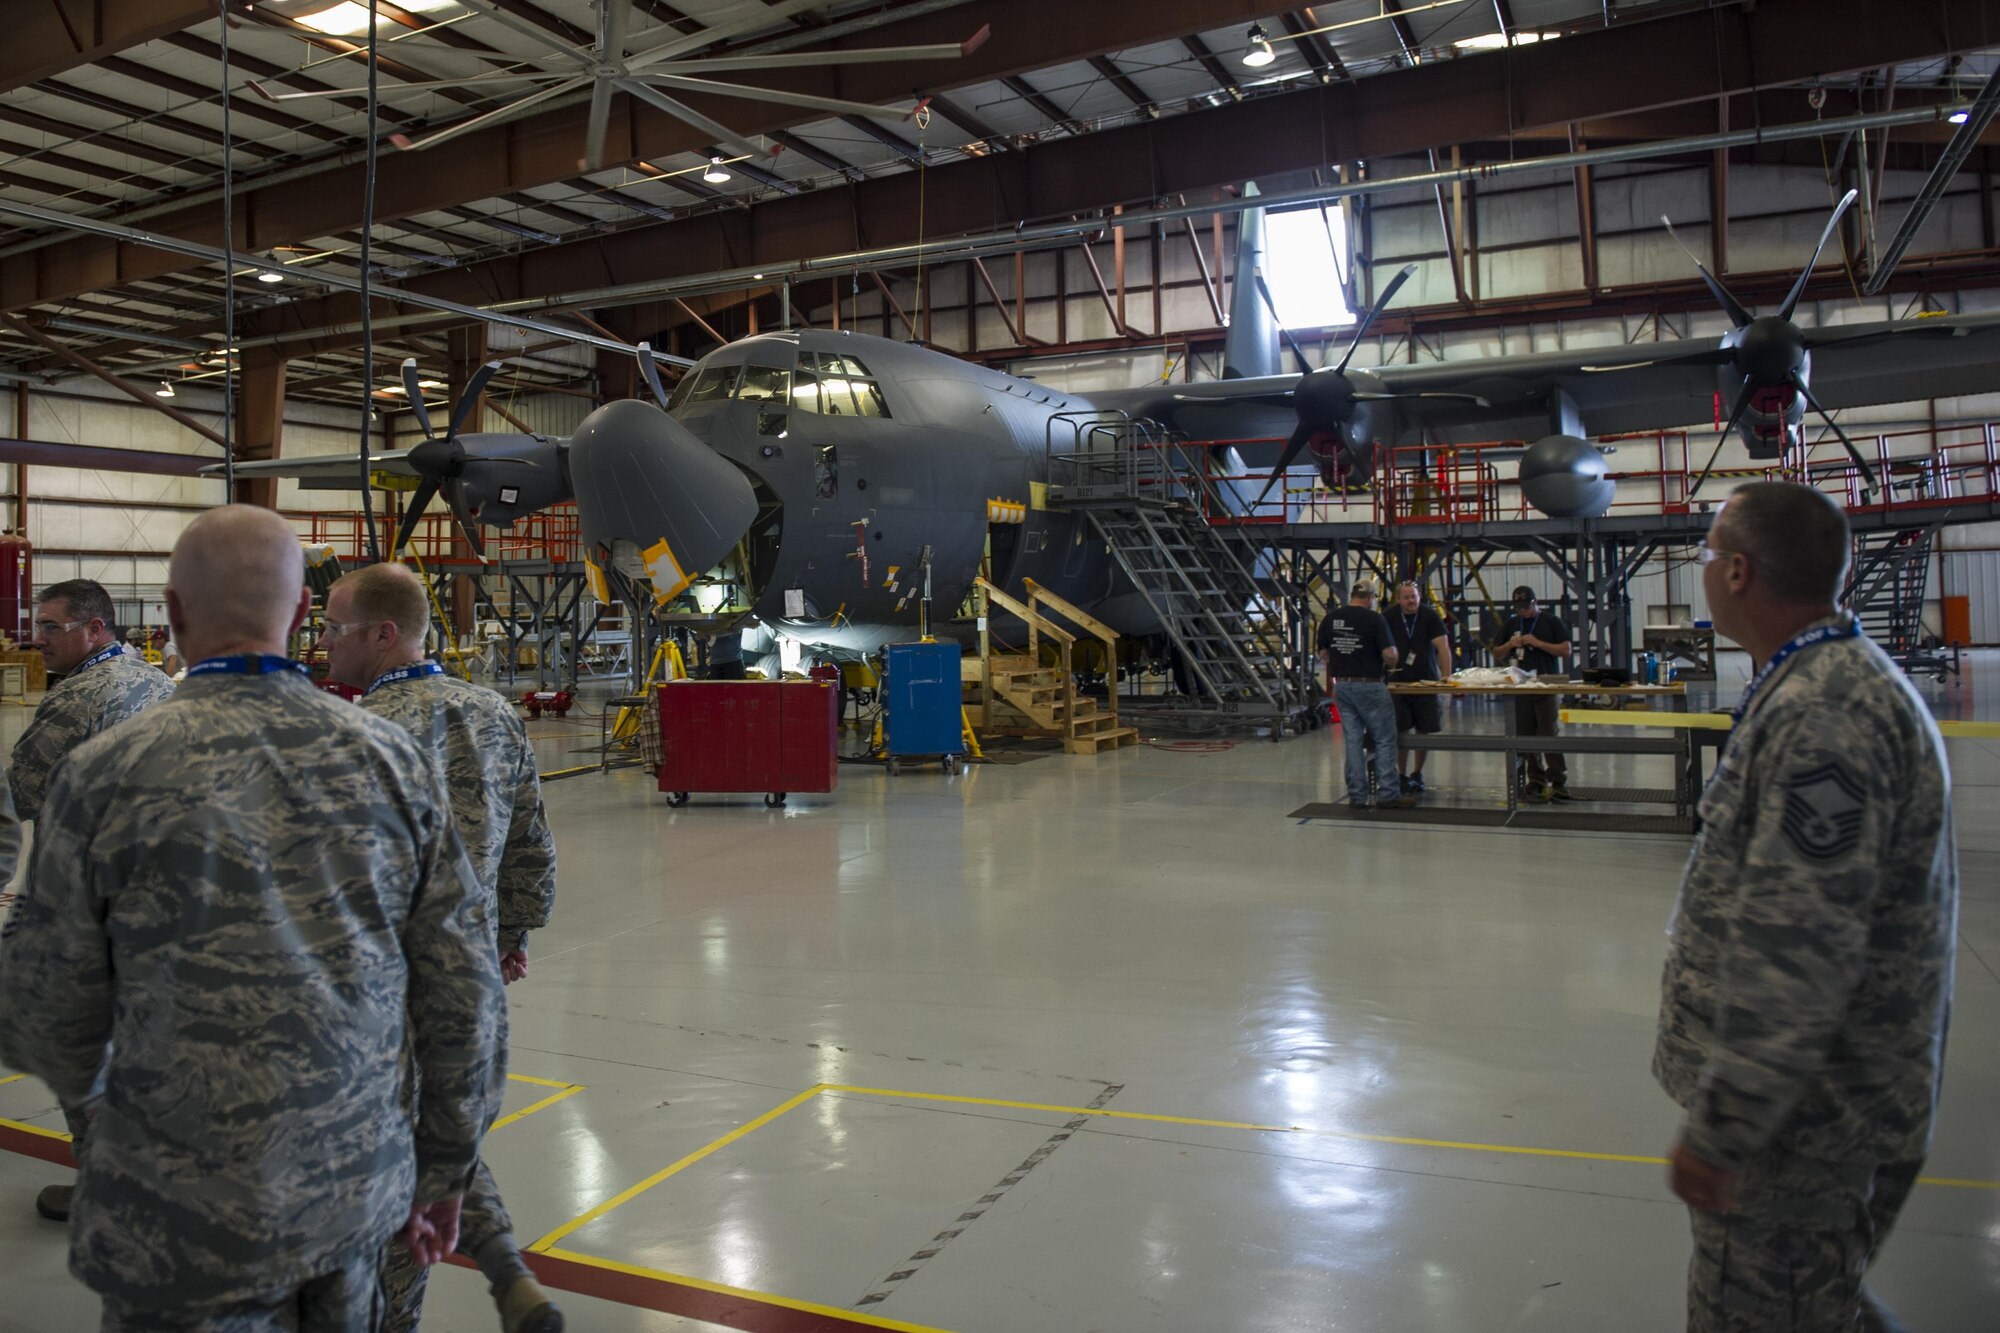 Senior leaders from the 1st Special Operations Wing tour a Lockheed Martin factory in Crestview, Fla., Oct. 24, 2016. The manufacturers are modifying four MC-130J Commando II aircraft to become AC-130J Ghostrider gunships. The AC-130J was developed to provide ground forces an expeditionary, direct-fire platform that is persistent, ideally-suited for urban operations and delivers precision, low-yield munitions against ground targets. (U.S. Air Force photo by Airman 1st Class Joseph Pick)